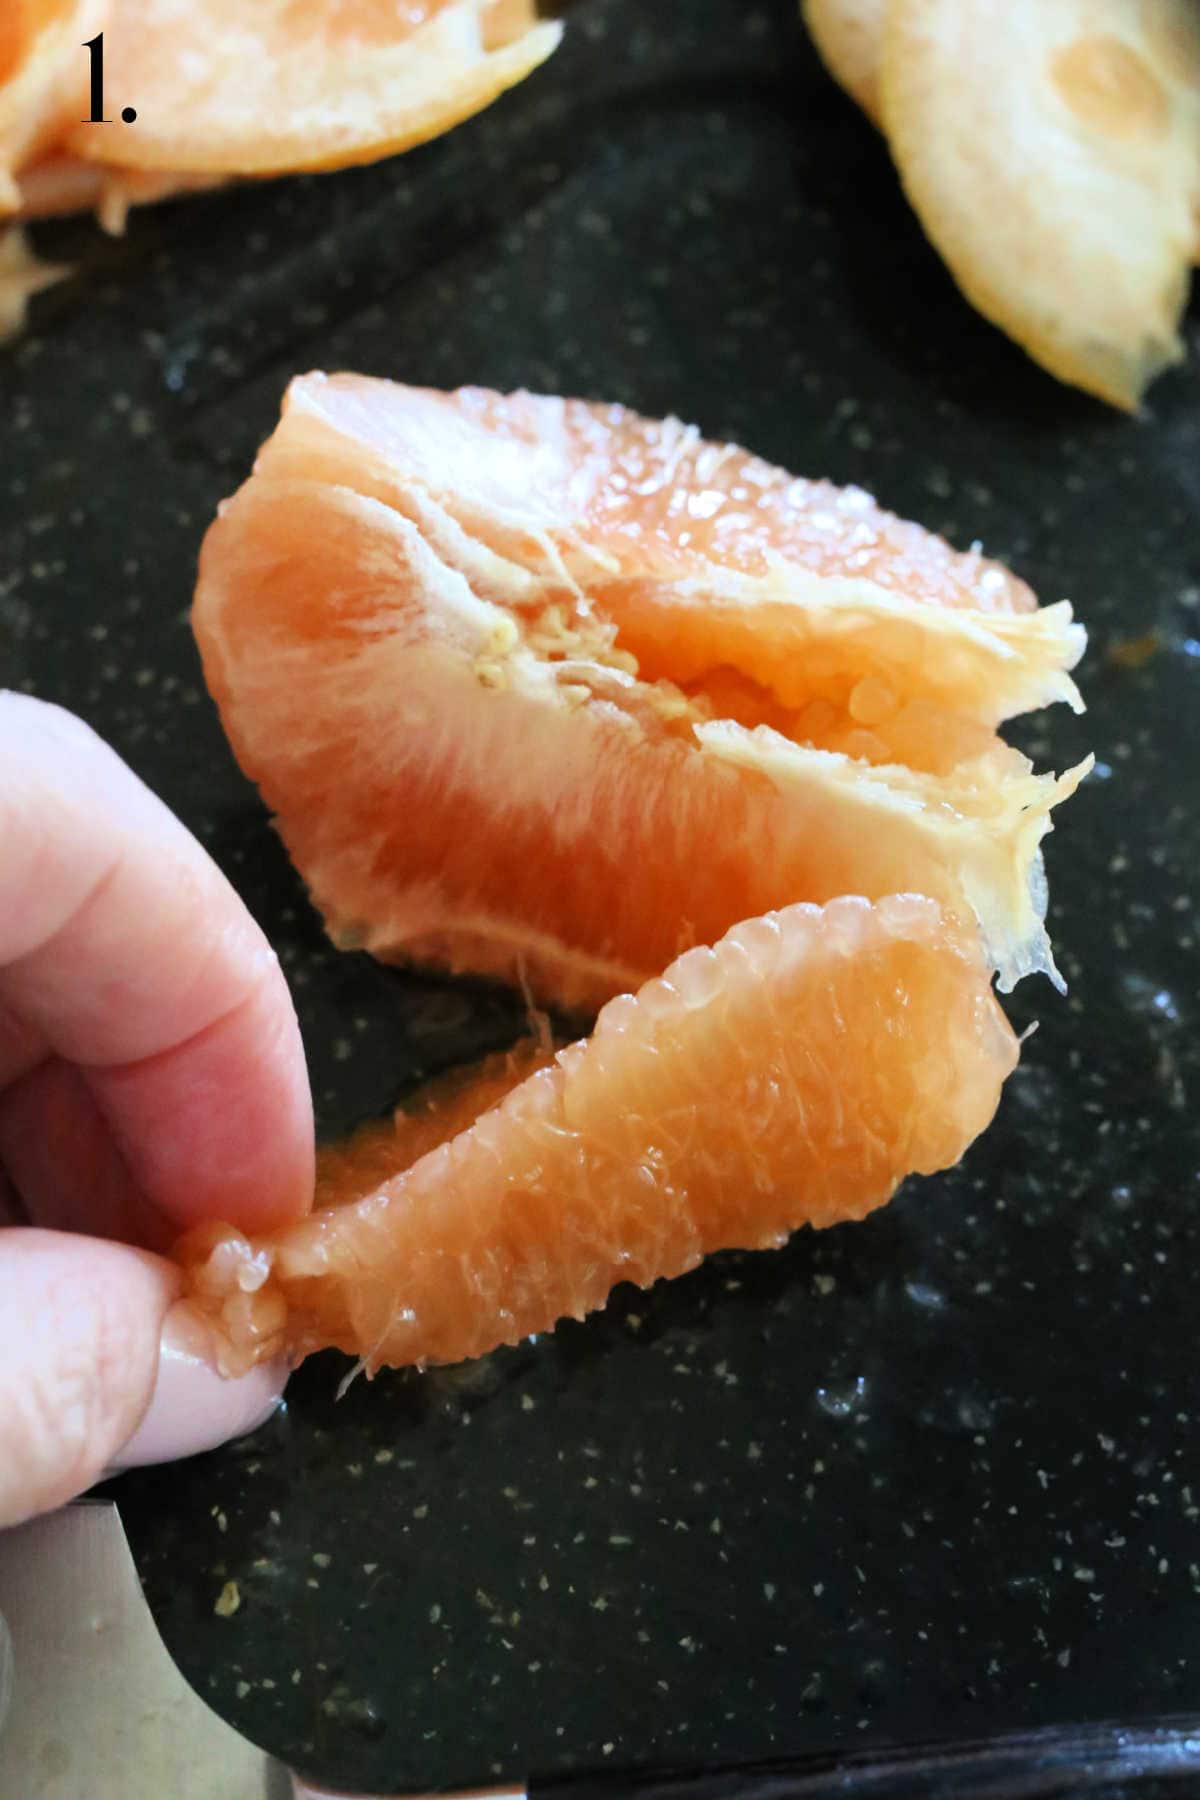 Hand removing slice of grapefruit from its membrane.